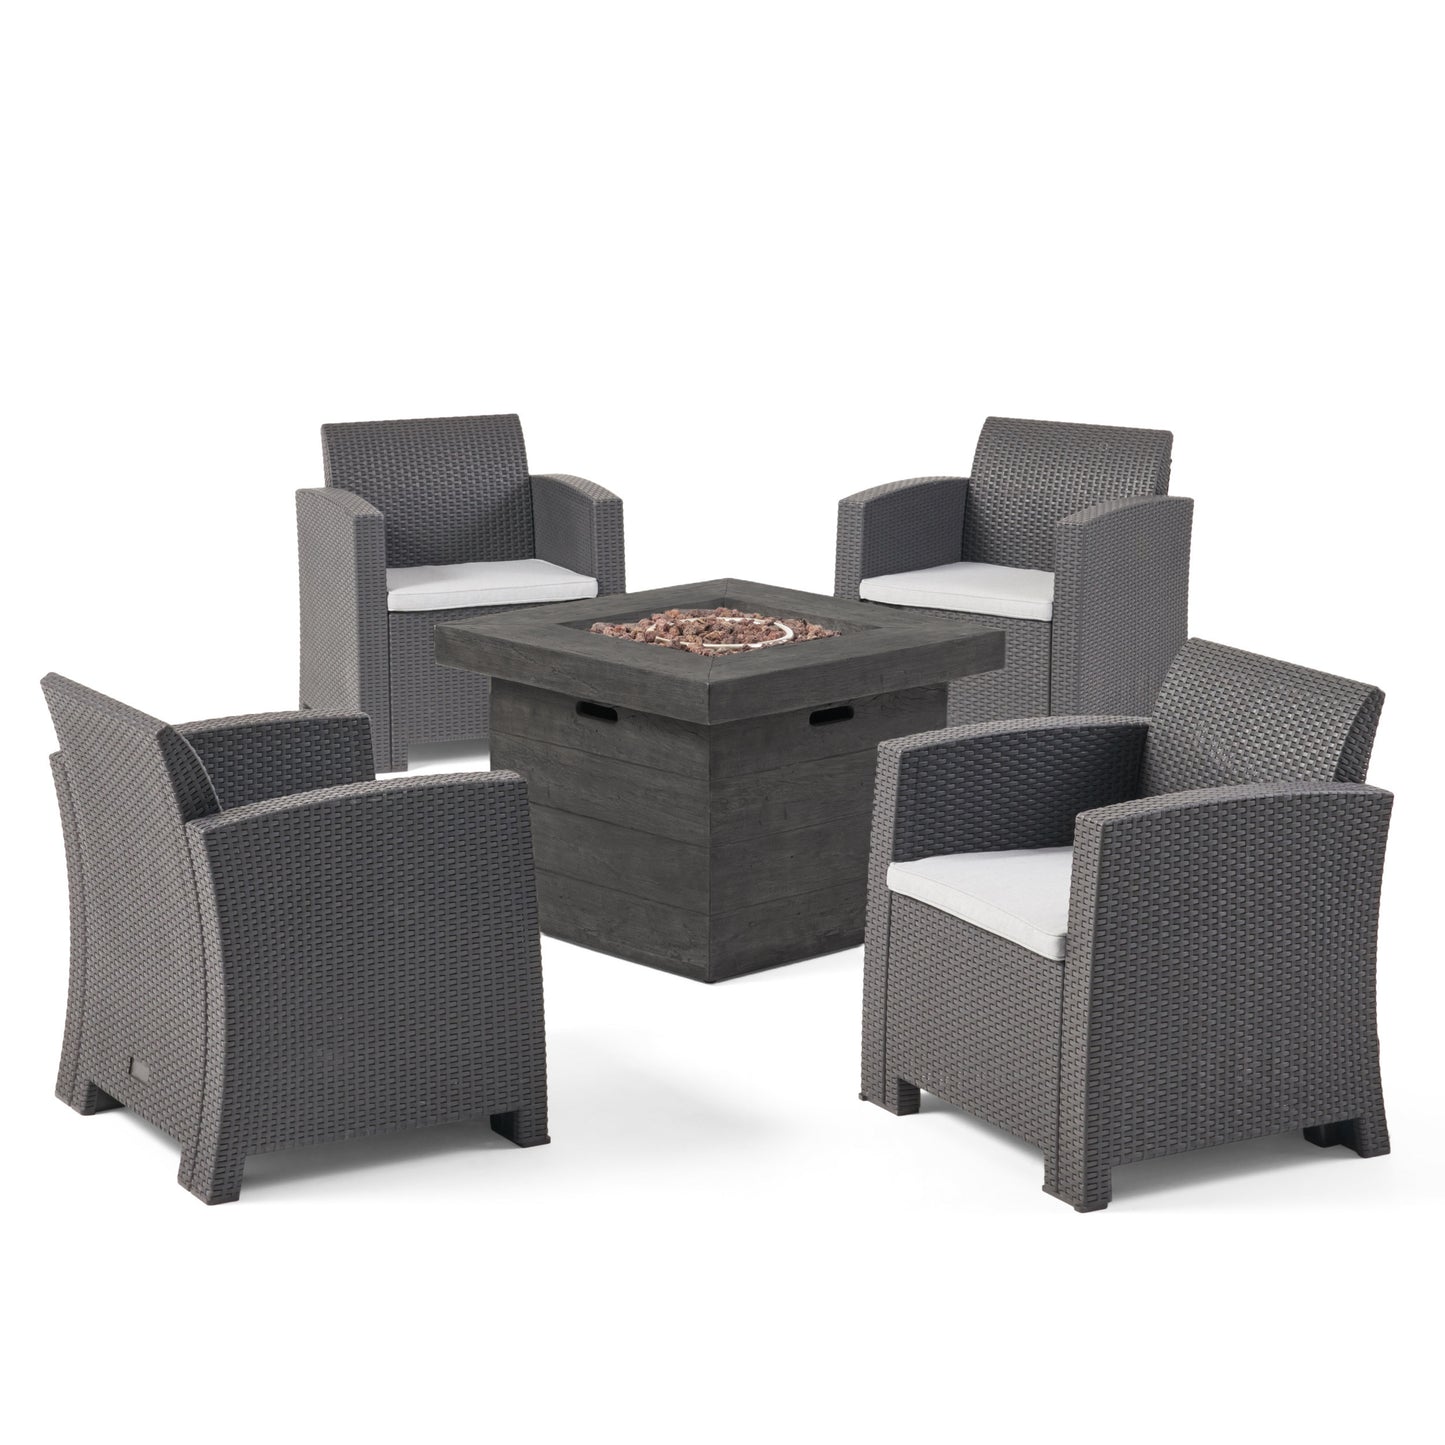 Ollie Outdoor 4-Seater Wicker Print Club Chair Chat Set with Fire Pit